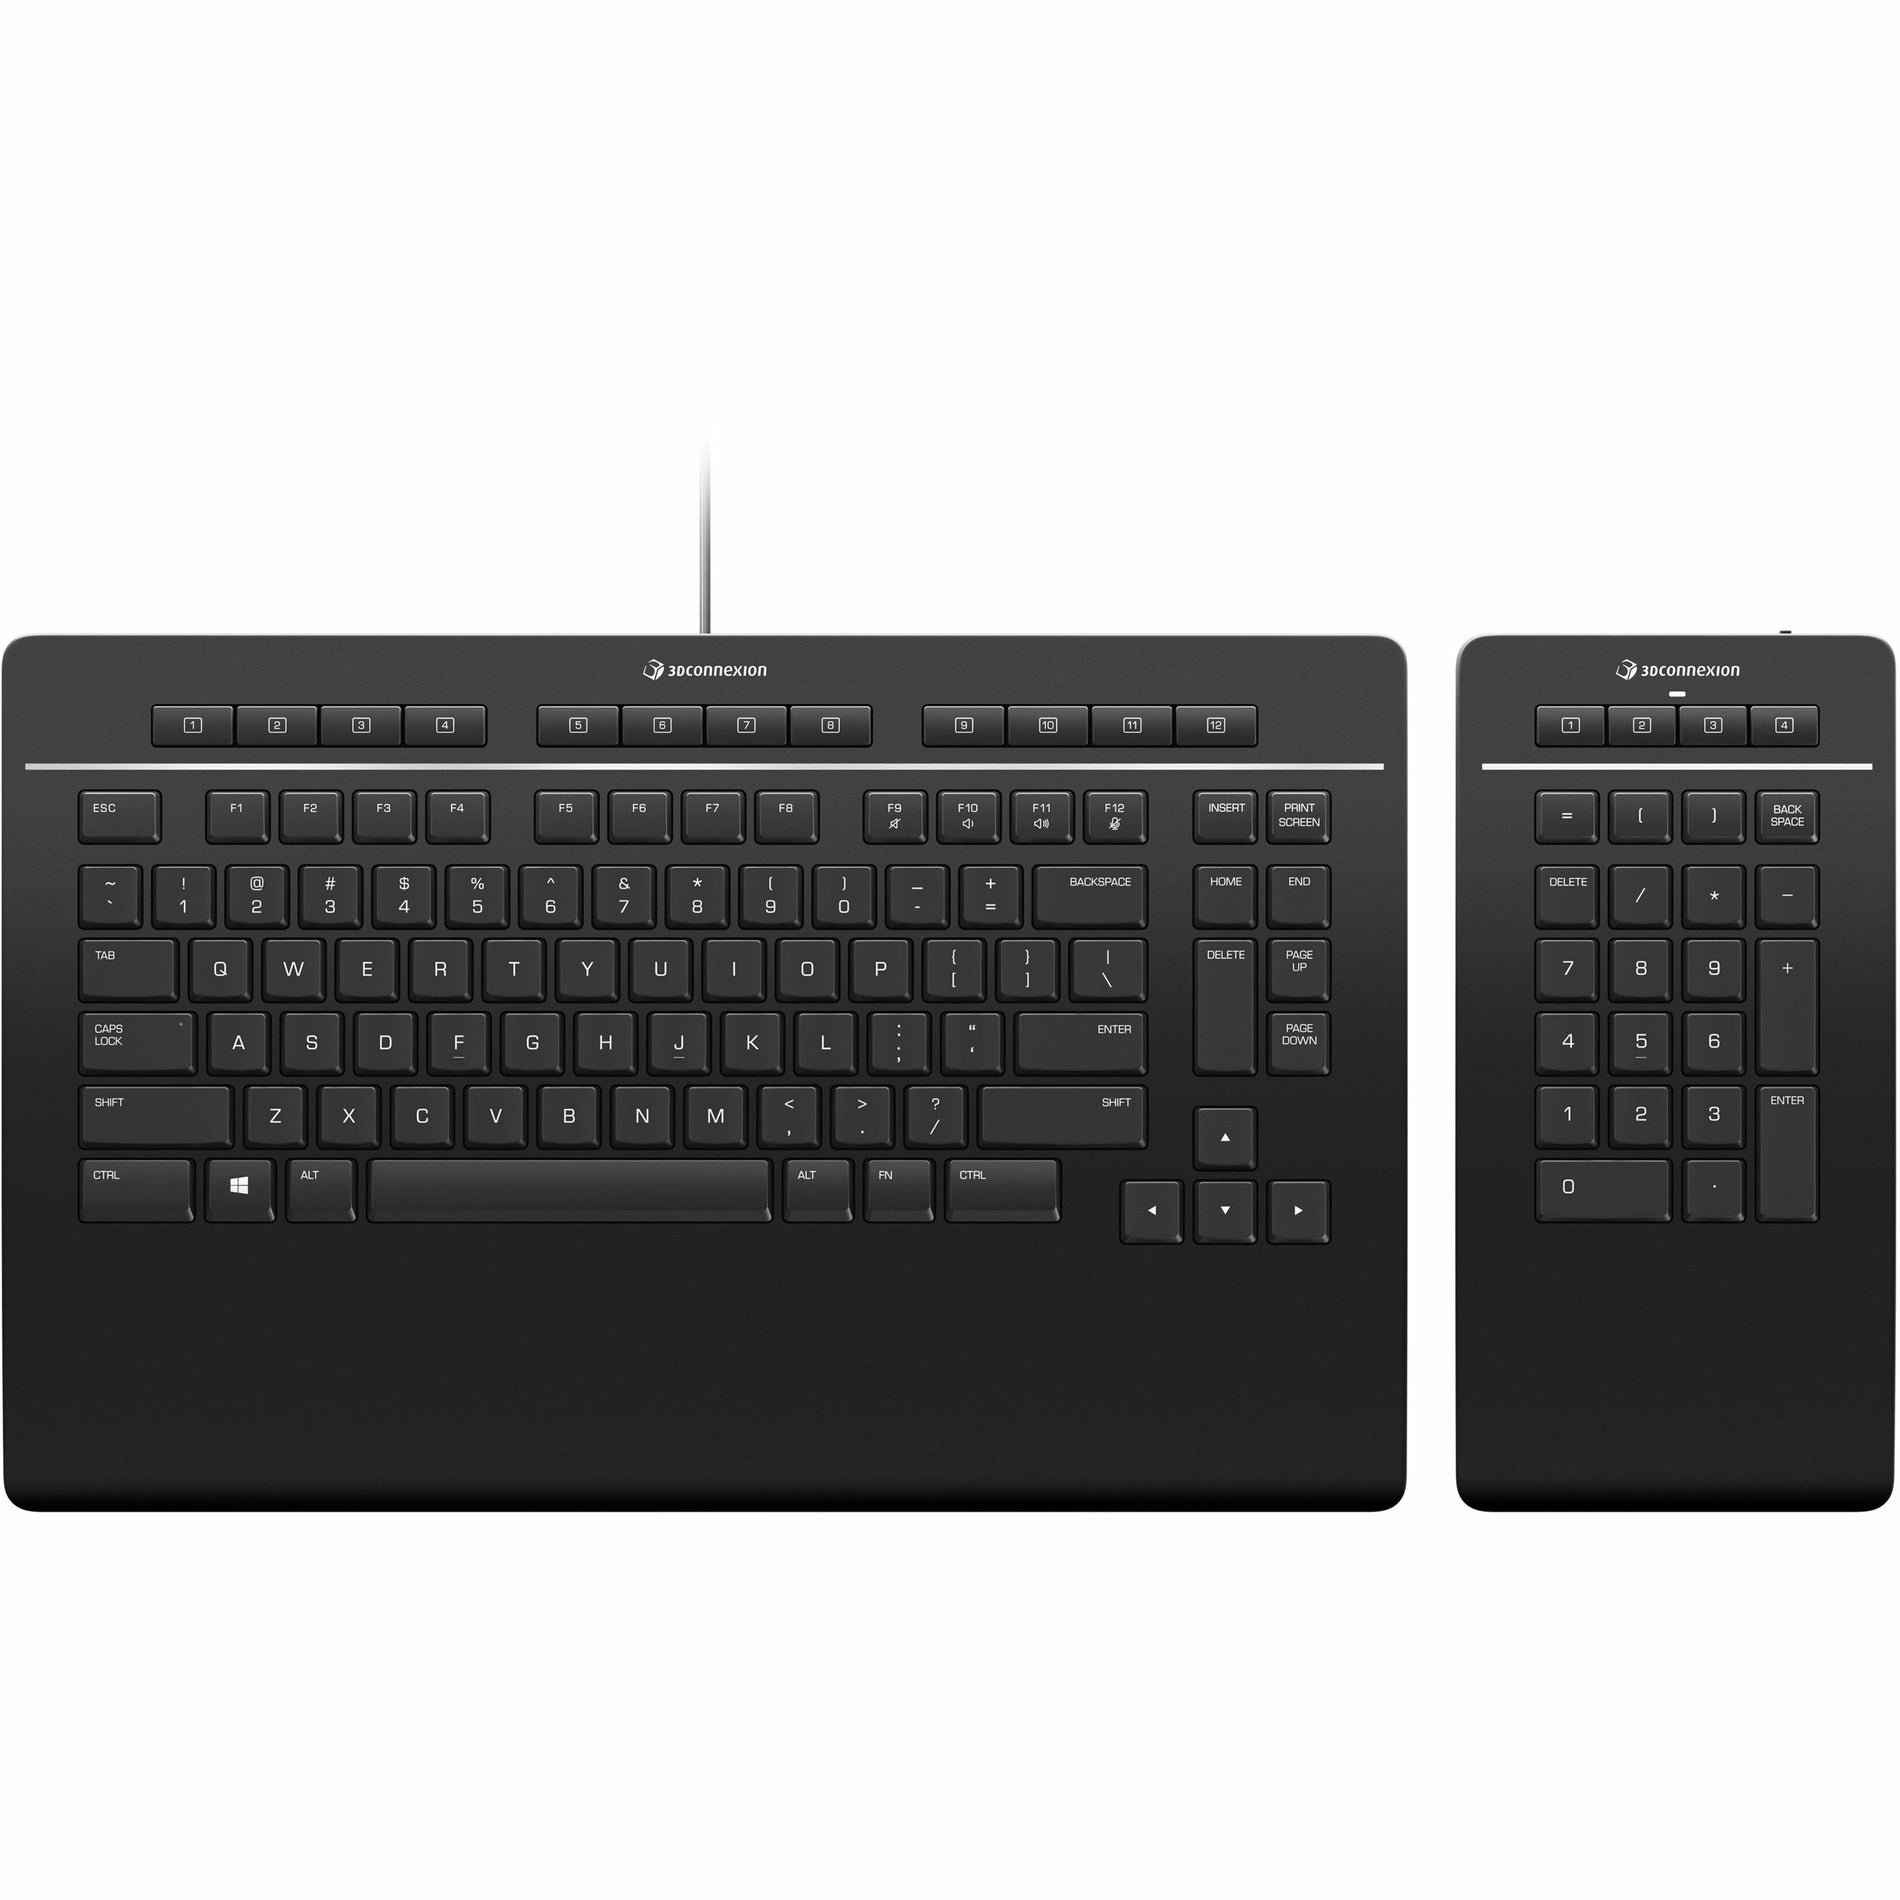 3Dconnexion 3DX-700090 Keyboard Pro with Numpad, US (QWERTY), Rechargeable Battery, LED Indicator, Adjustable Feet, Palm Rest